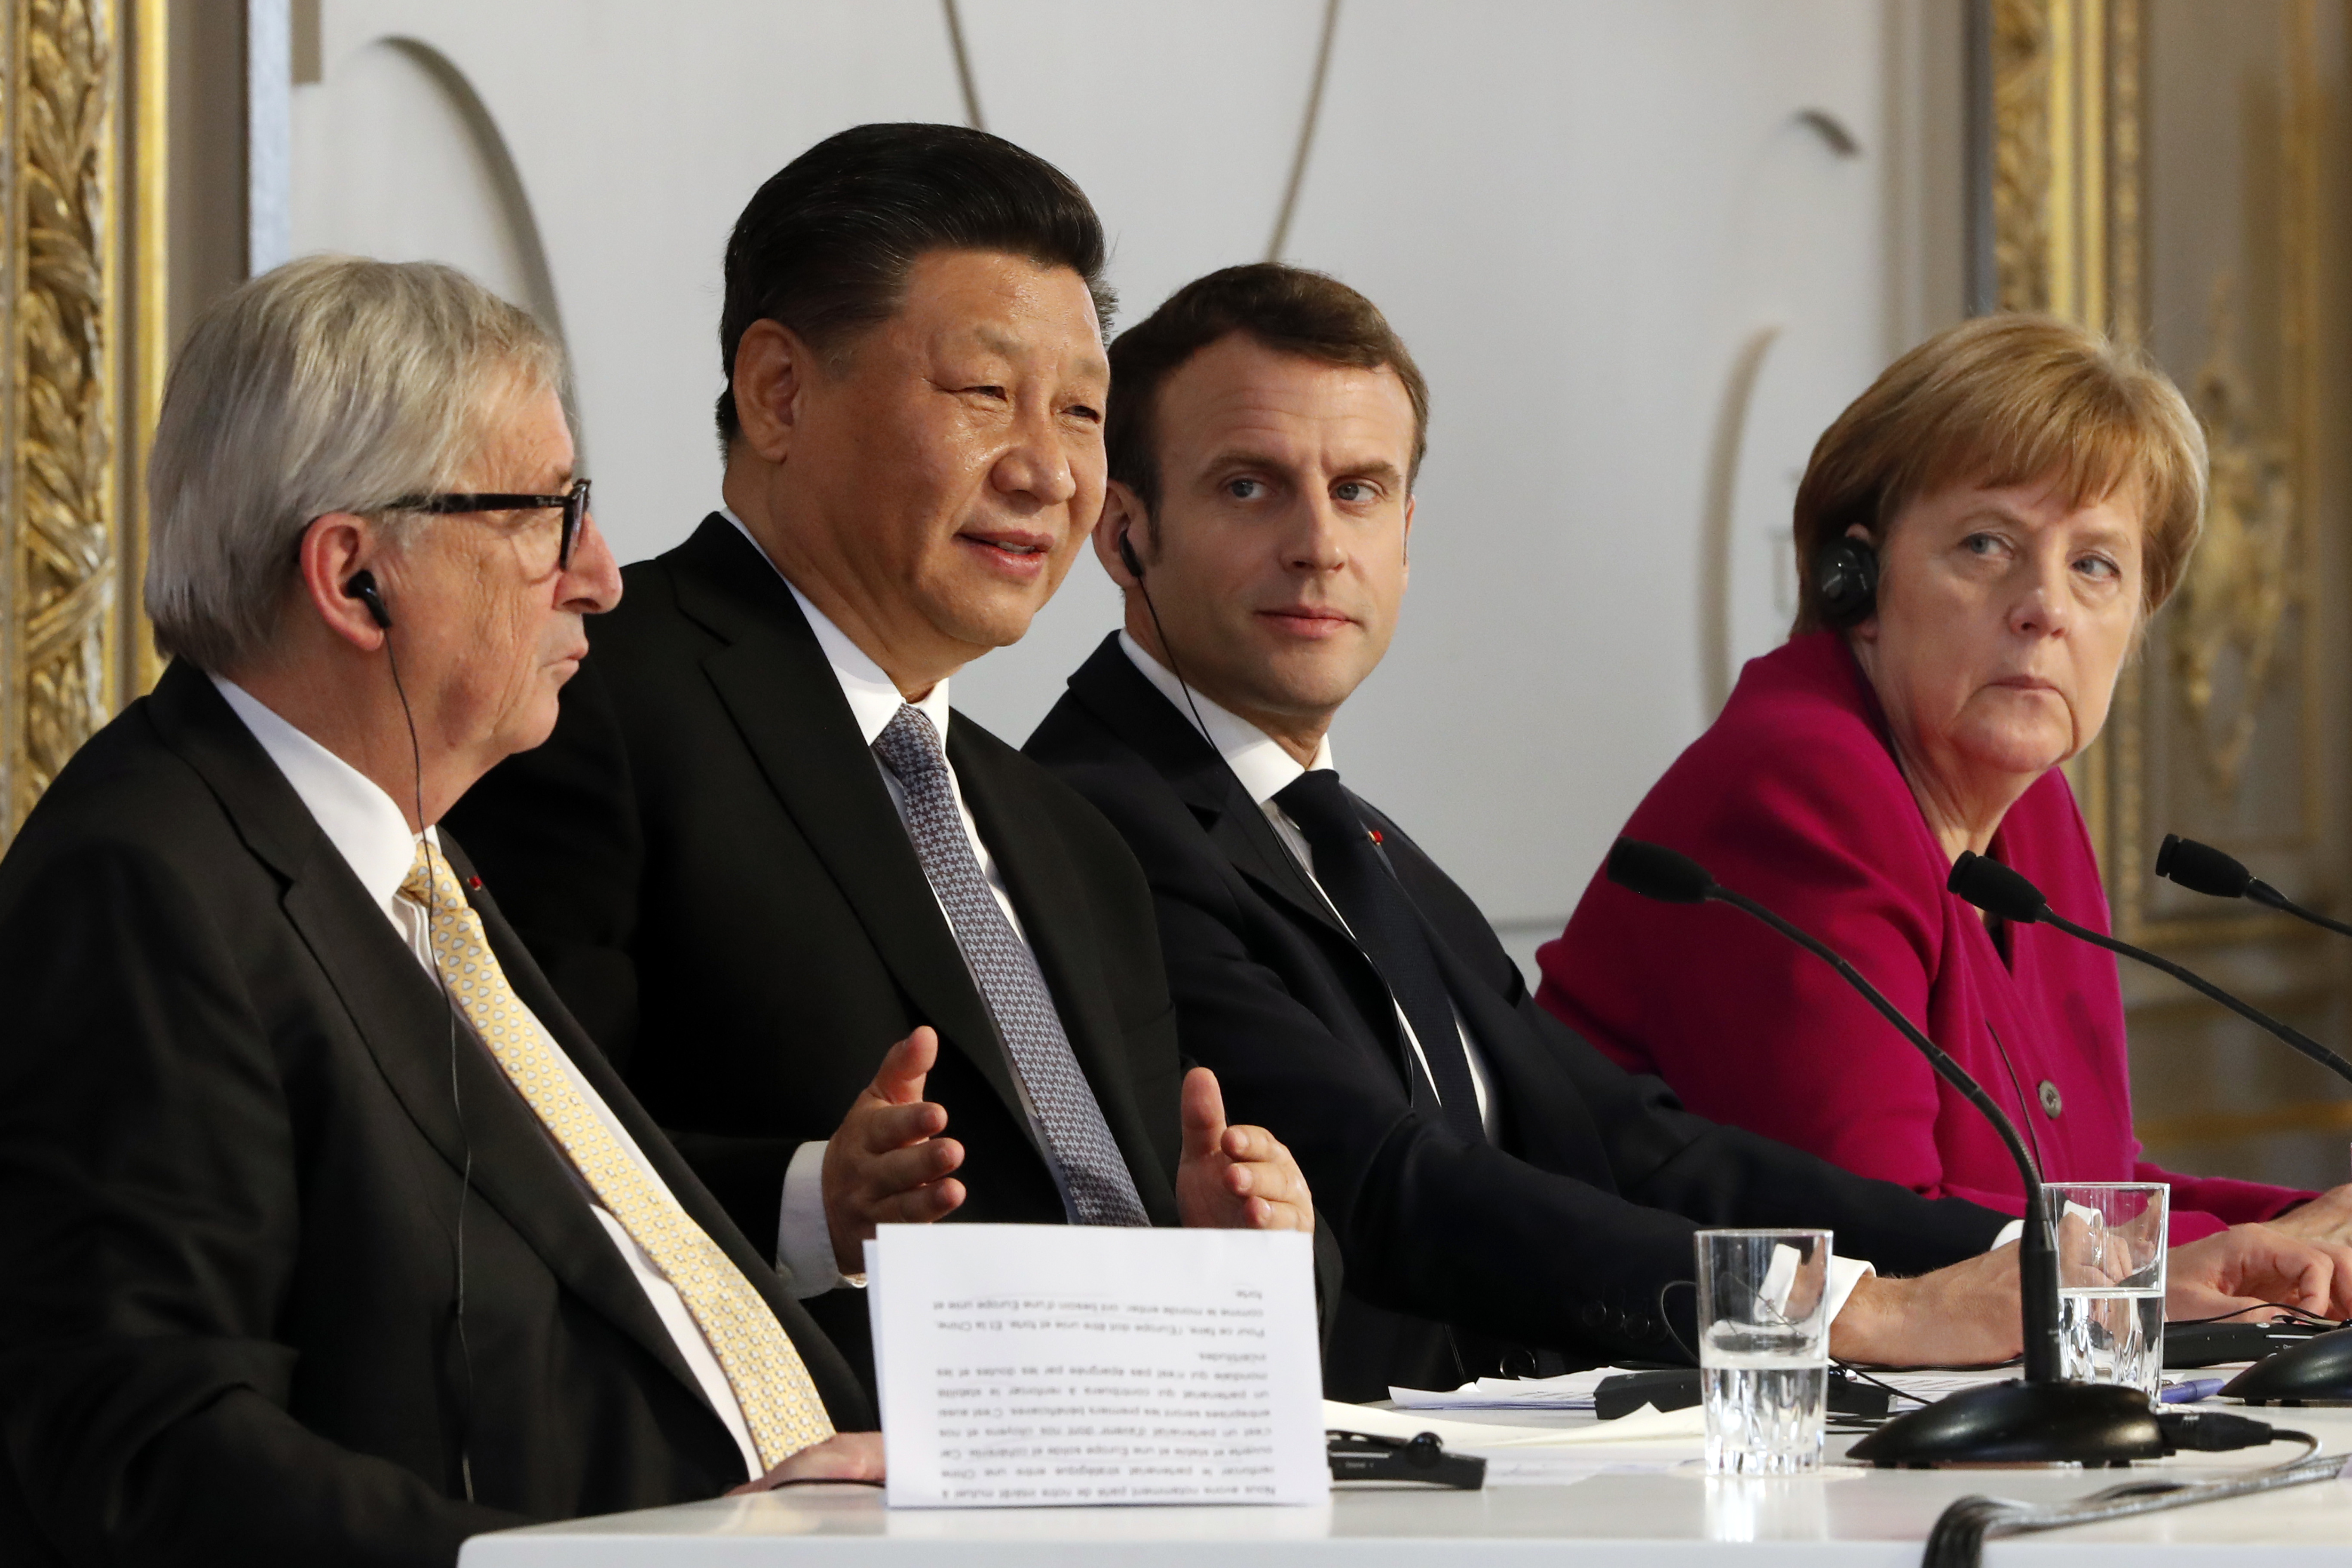 European Commission President Jean-Claude Juncker, Chinese President Xi Jinping, French President Emmanuel Macron and German Chancellor Angela Merkel hold a press conference at the Elysee presidential palace, Paris, March 26, 2019.